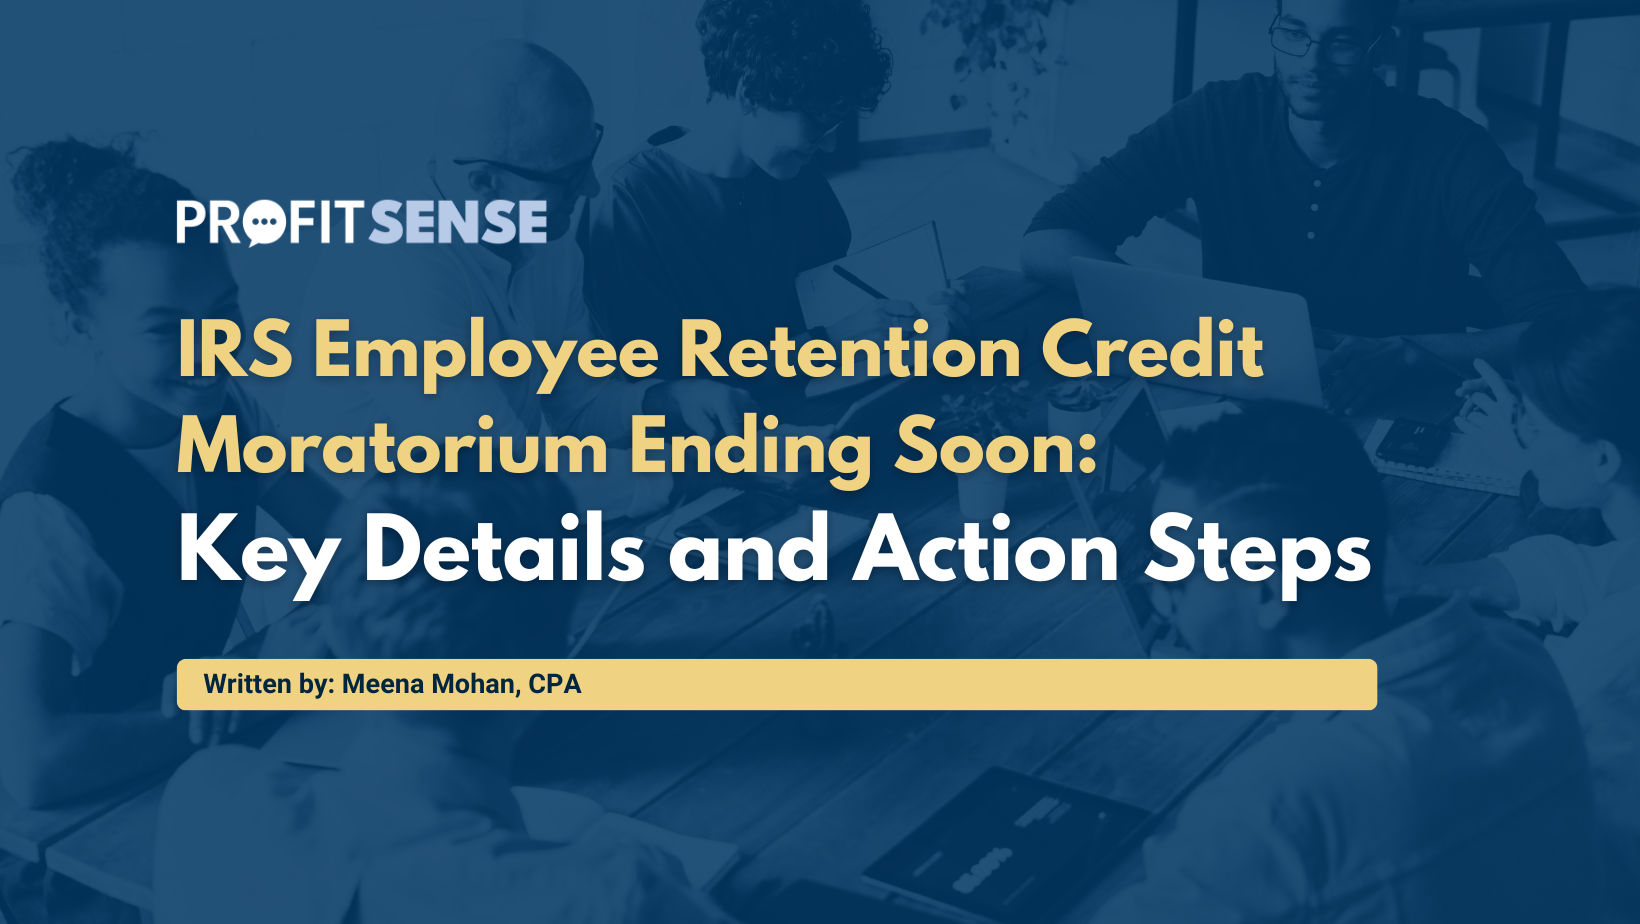 IRS Employee Retention Credit Moratorium Ending Soon: Key Details and Action Steps